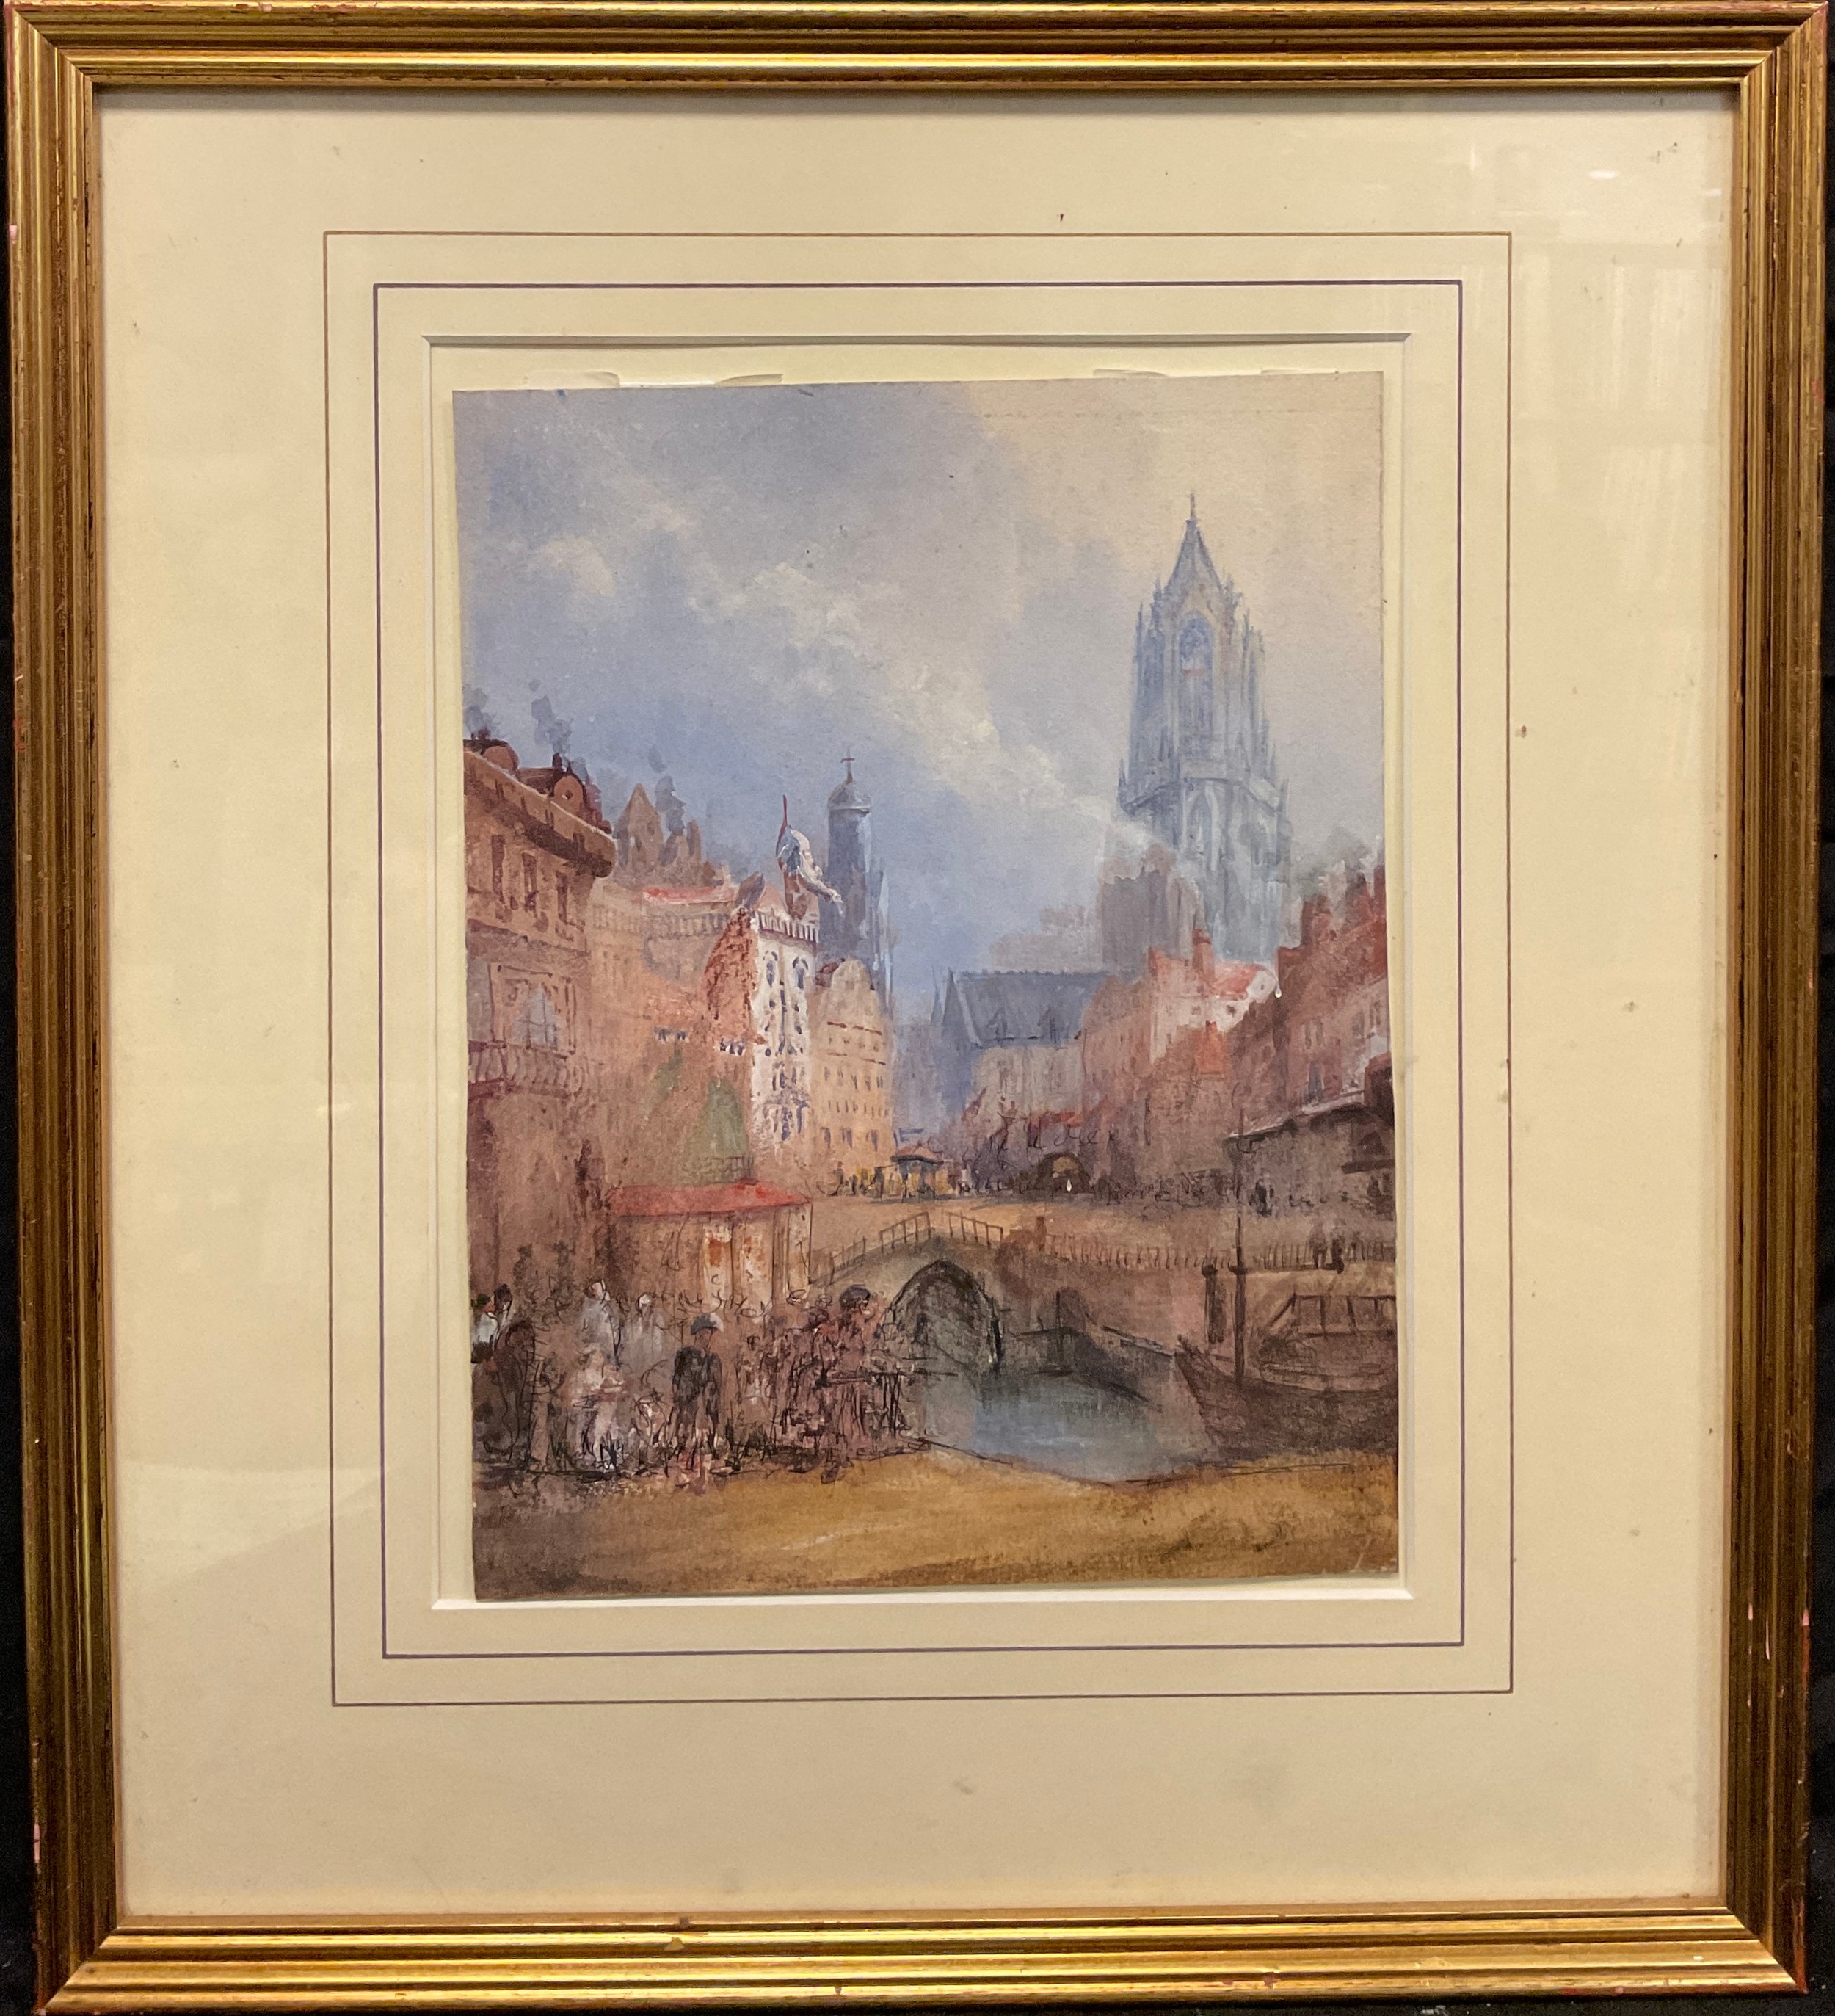 Manner of David Roberts, ‘Utrecht’, titled, and dated 1875 to verso, watercolour, 26cm x 19.5cm. - Image 2 of 2